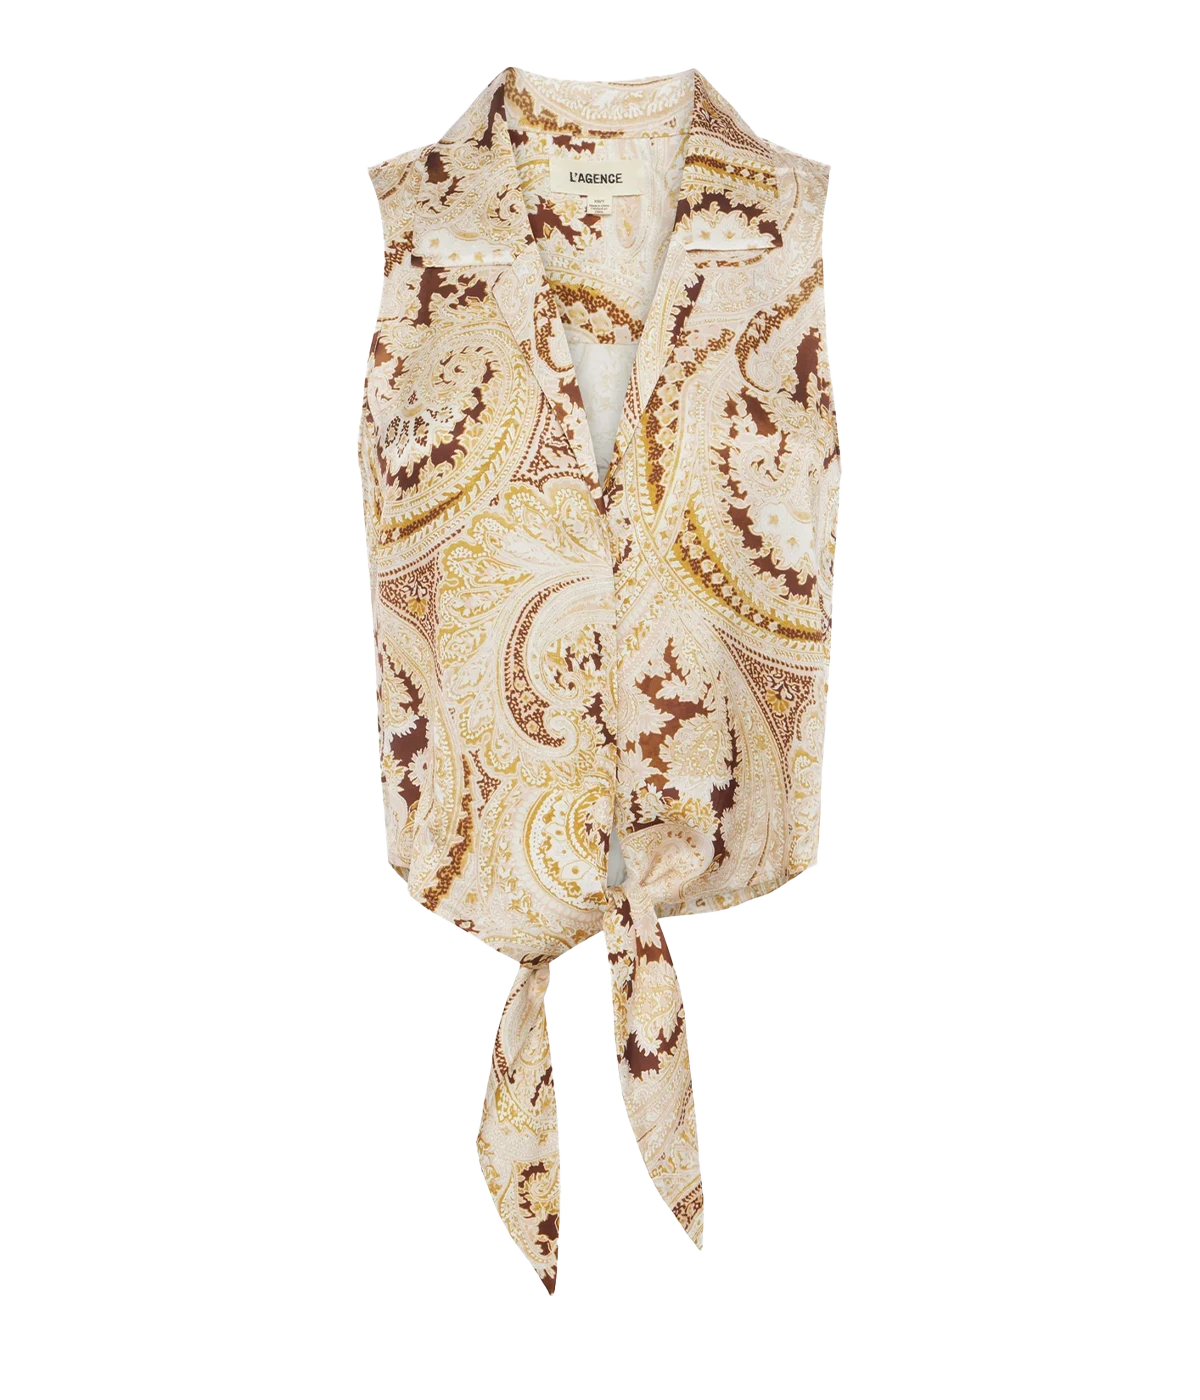 Amos Sleeveless Tie Blouse in Ivory Multi Boute Paisley